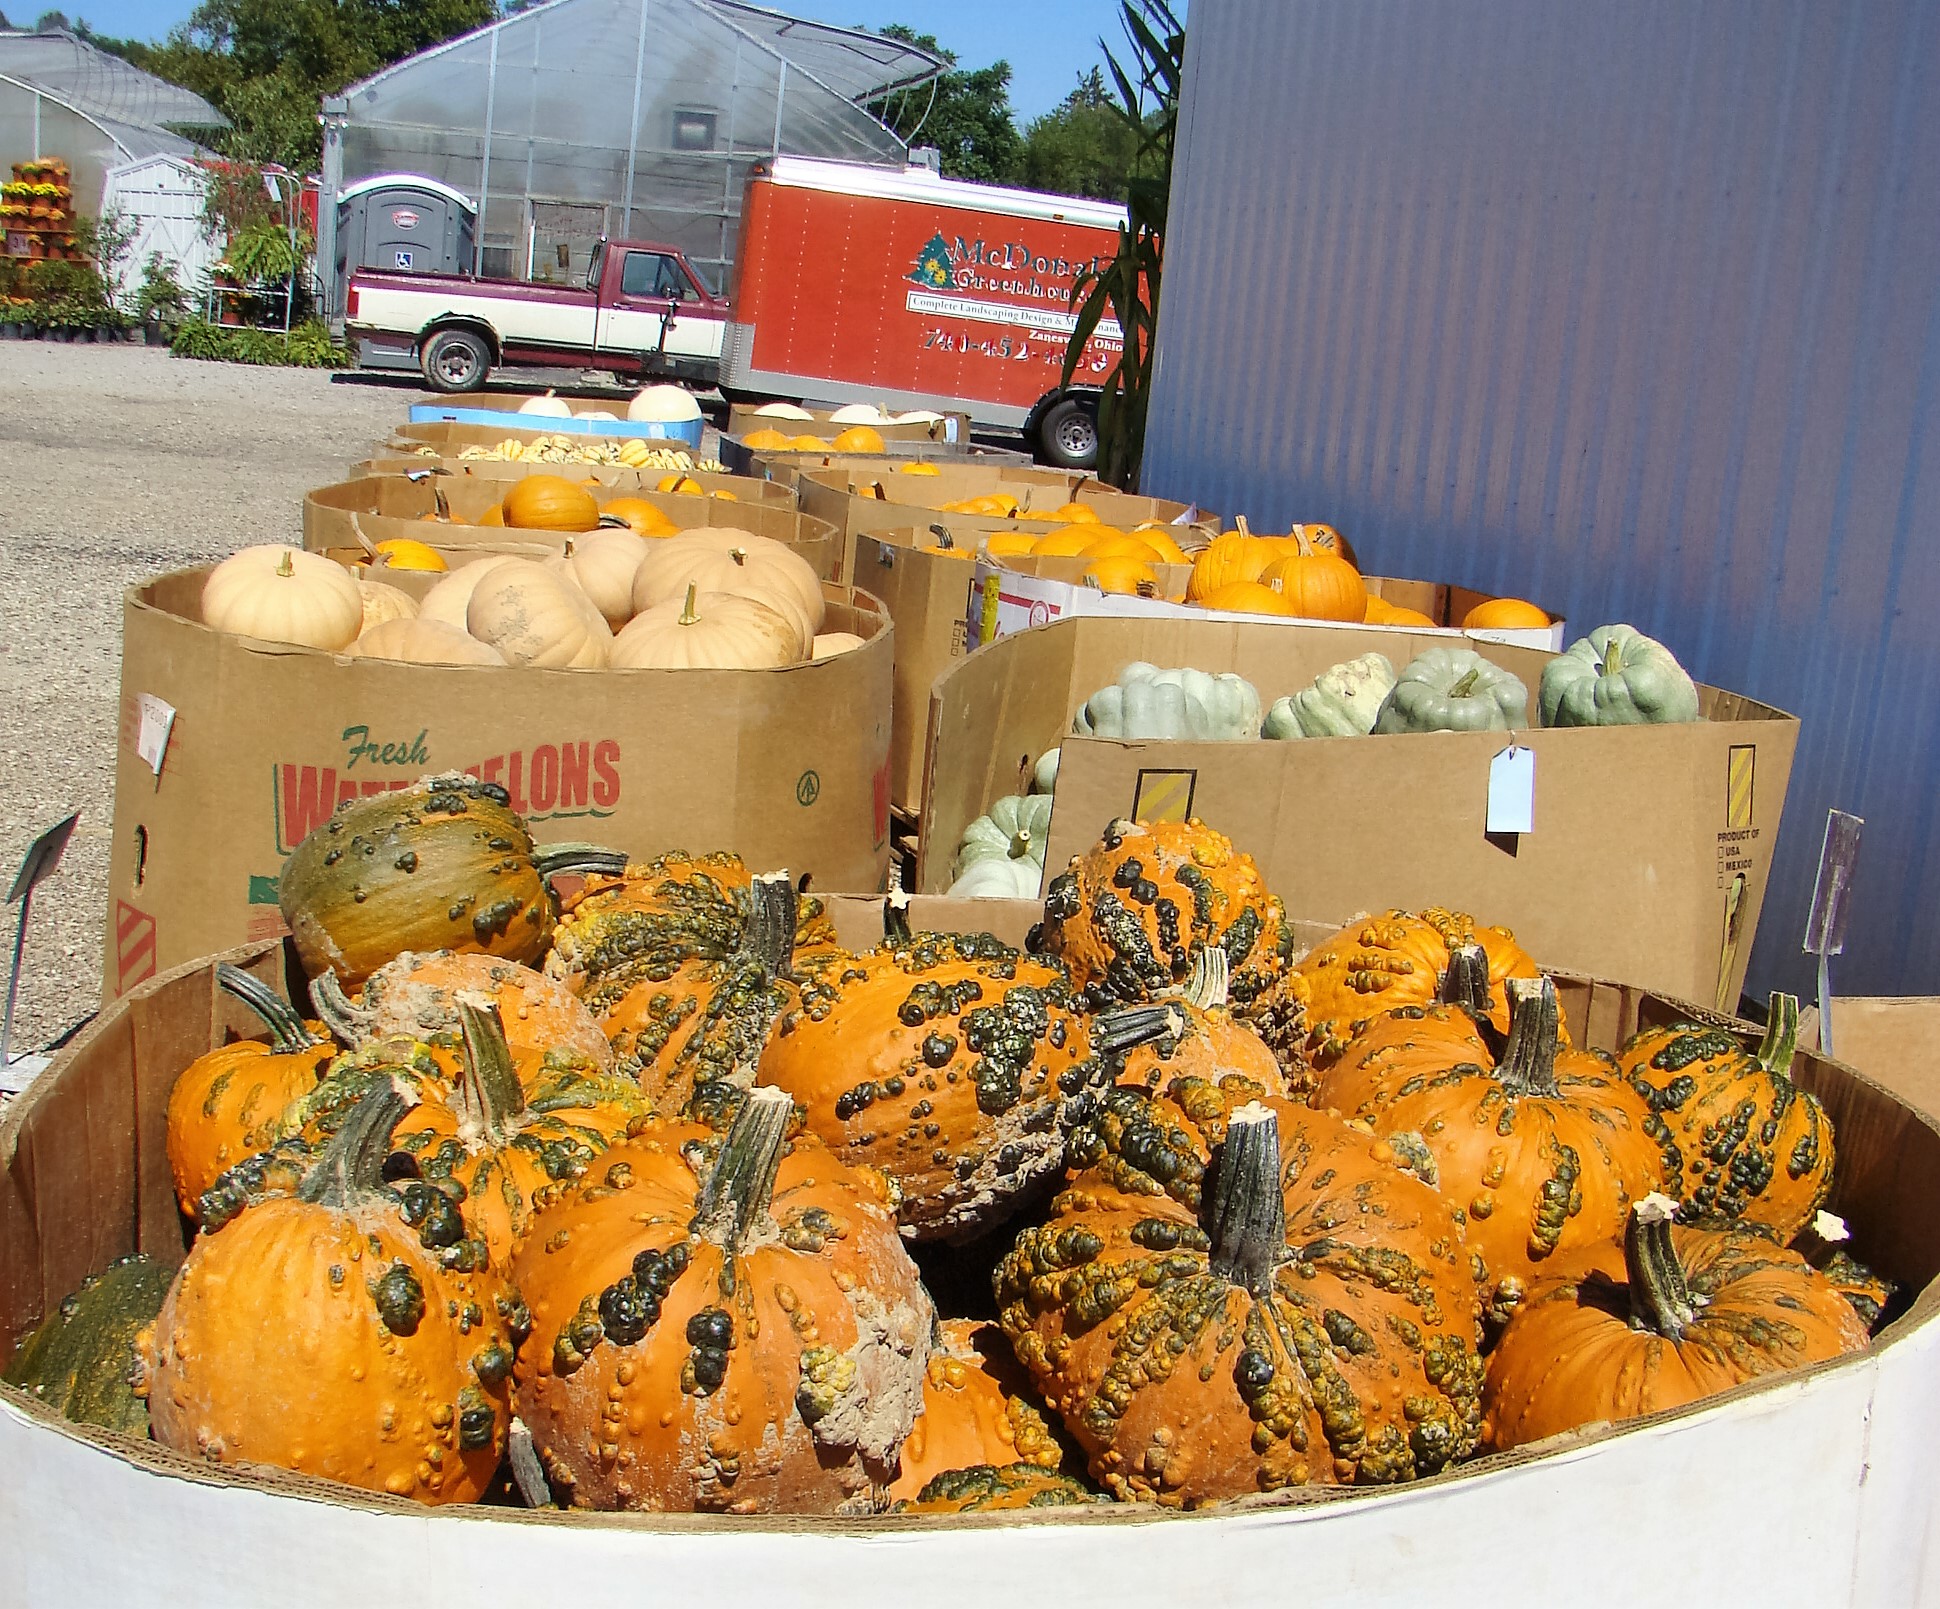 All kinds of pumpkins are waiting to be taken home for decorations.